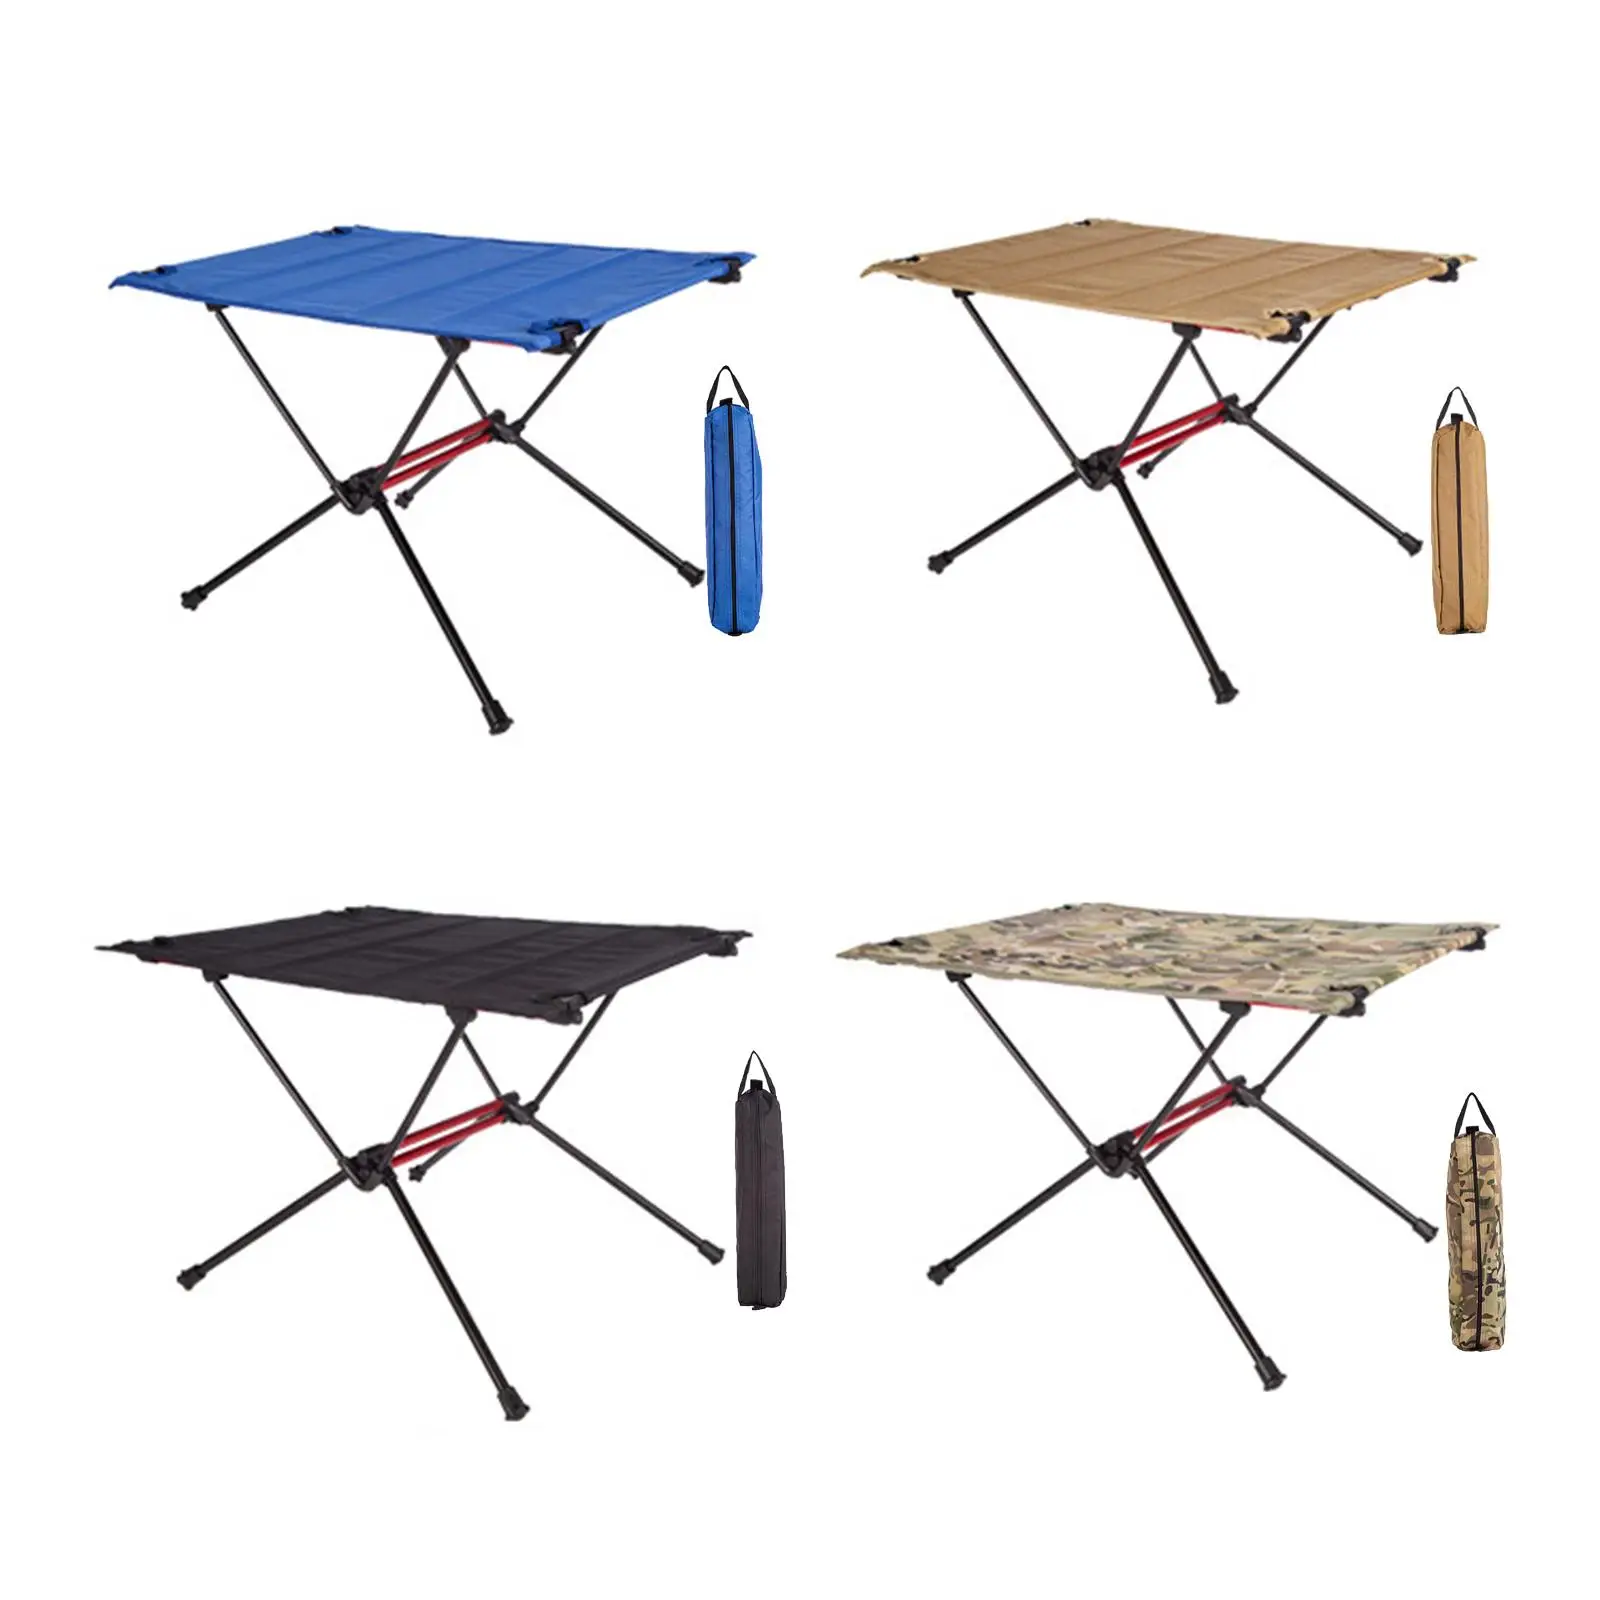 Lightweight Collapsible Aluminum Portable Roll Up Outdoor Folding Camping Table Patio Foldable Picnic Table with Carrying Bag